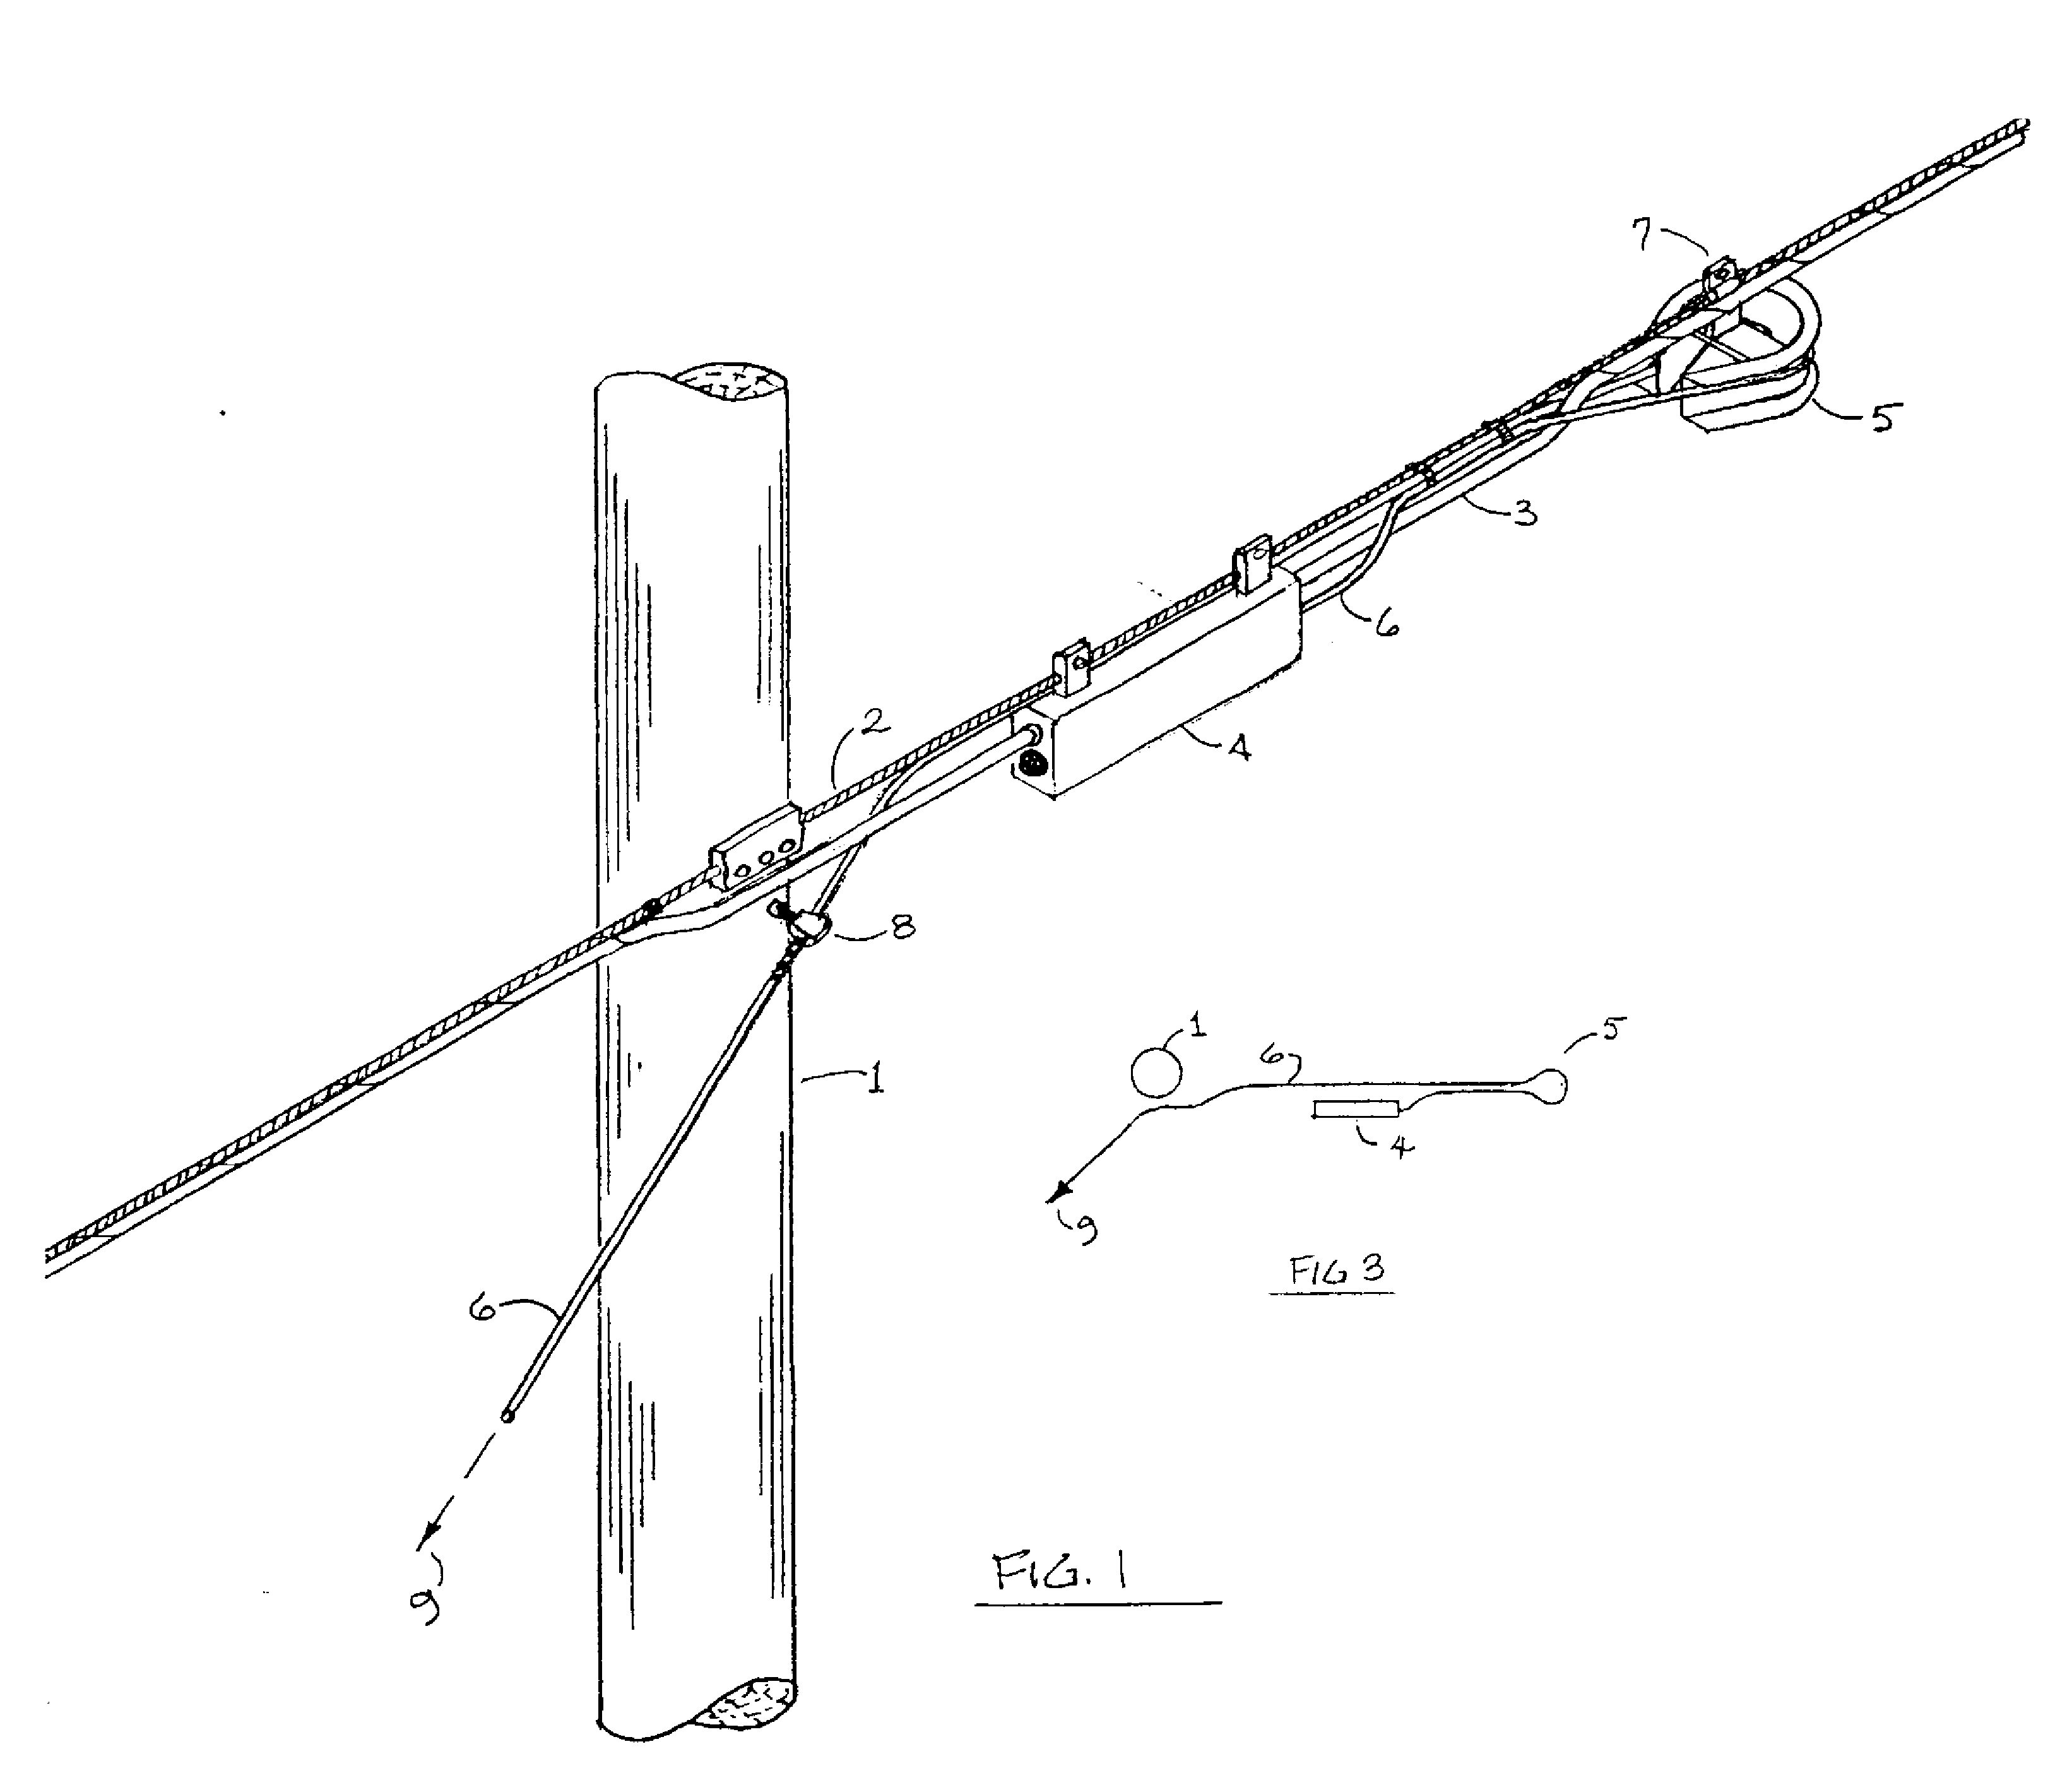 Support Fixture and Method for Supporting Subscriber Specific Fiber Optic Drop Wire